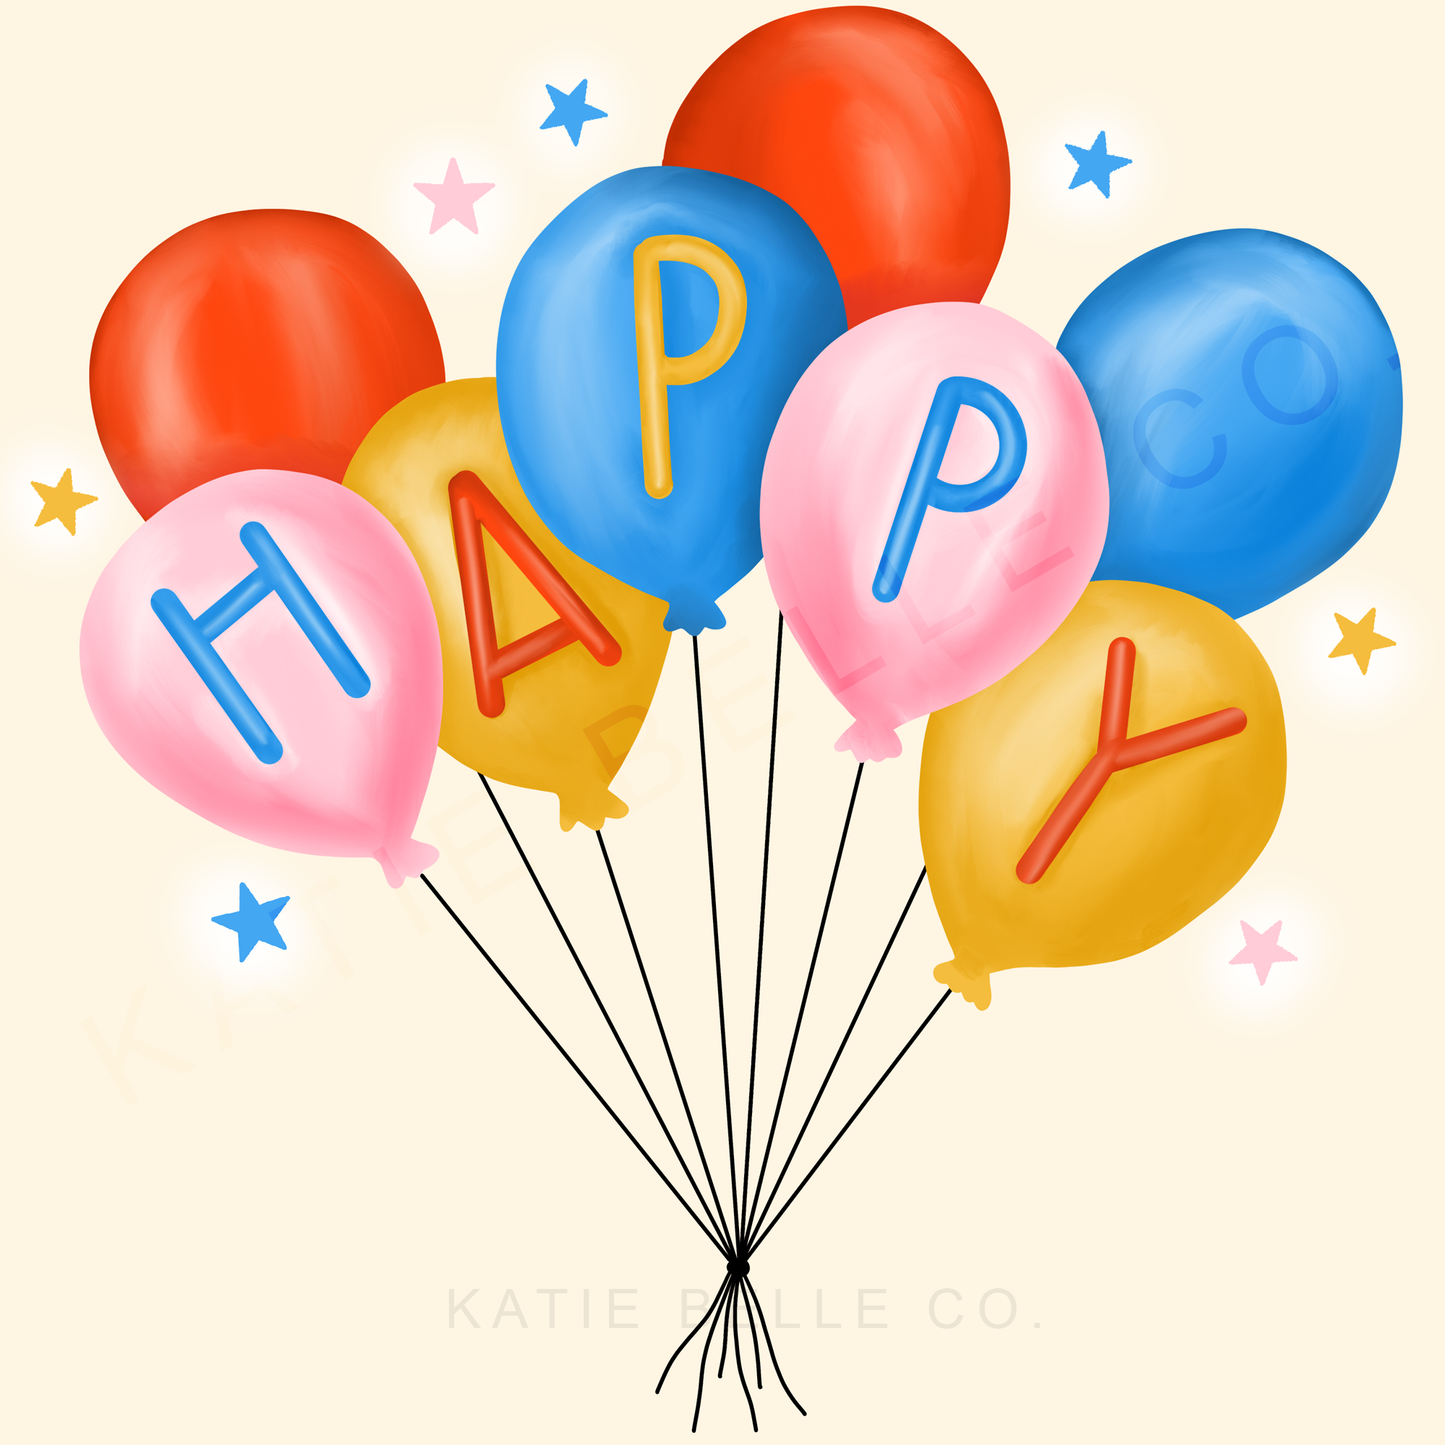 Happy Birthday Greeting Card. Happy Birthday Balloons . Happy Birthday Handmade card. Modern Birthday Card. Katie Belle Co. Birthday card for her. Unique Birthday card. Blank greeting card. Happy Birthday Gifts.